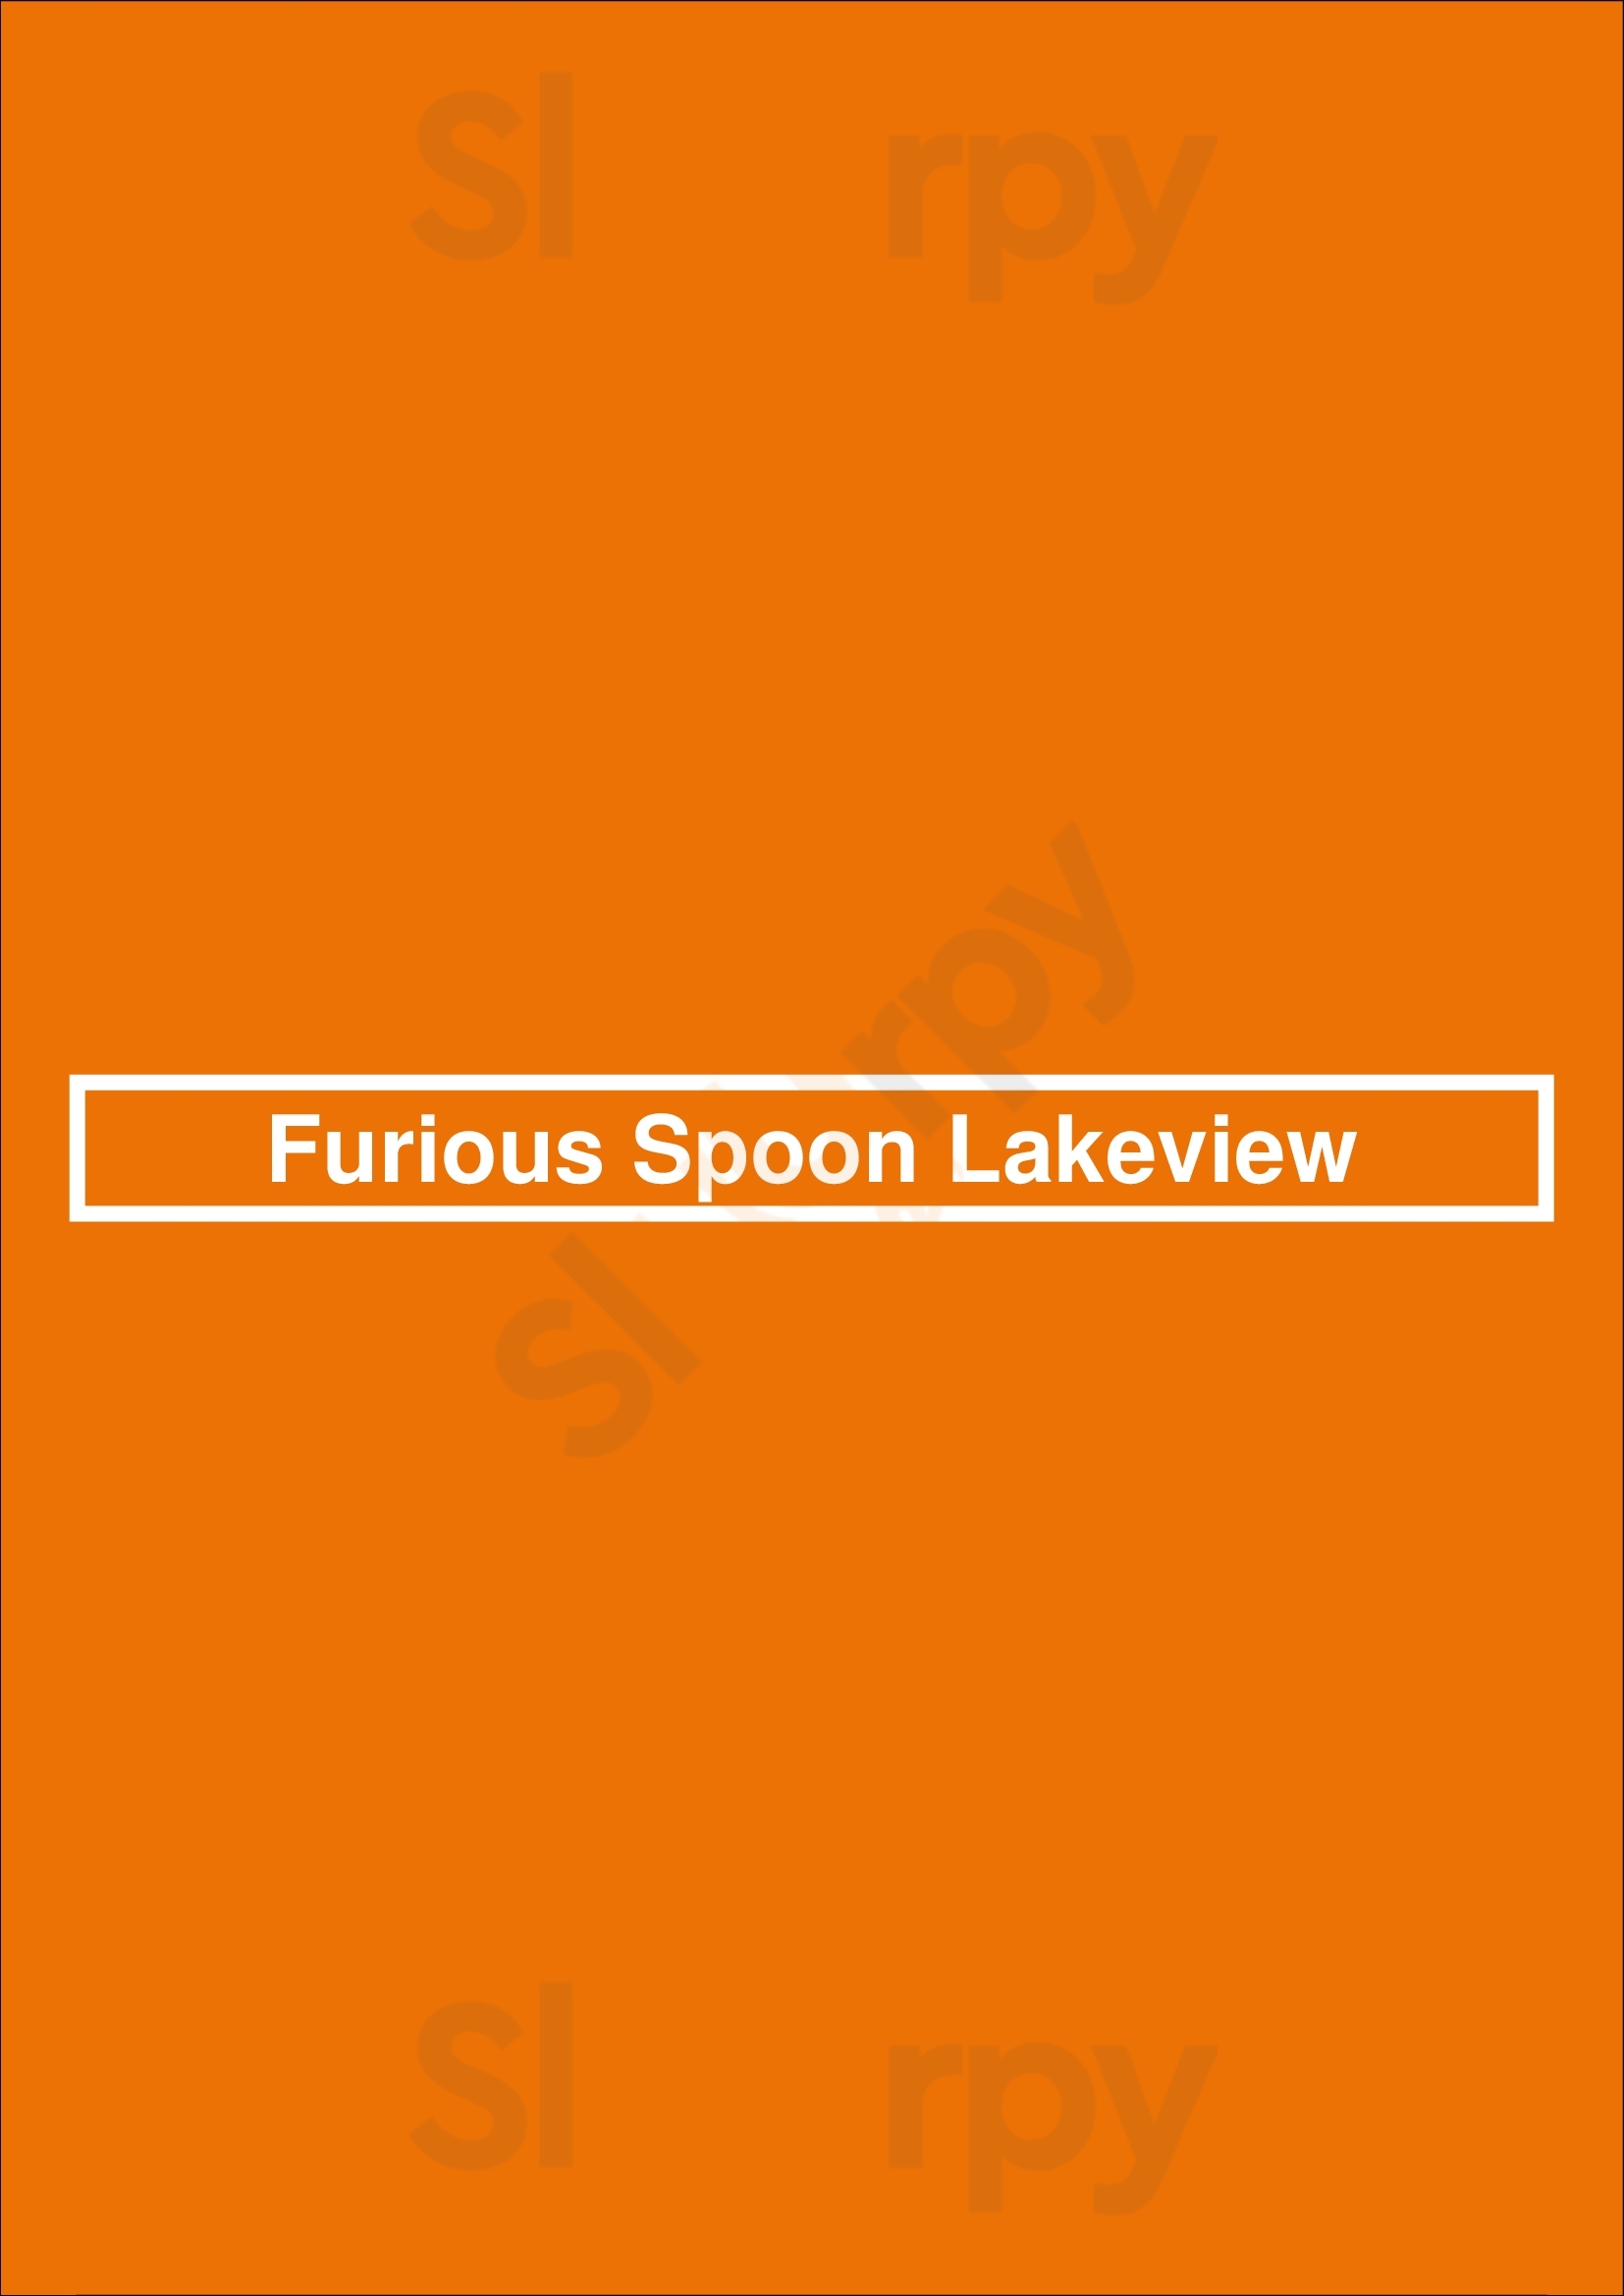 Furious Spoon Lakeview Chicago Menu - 1